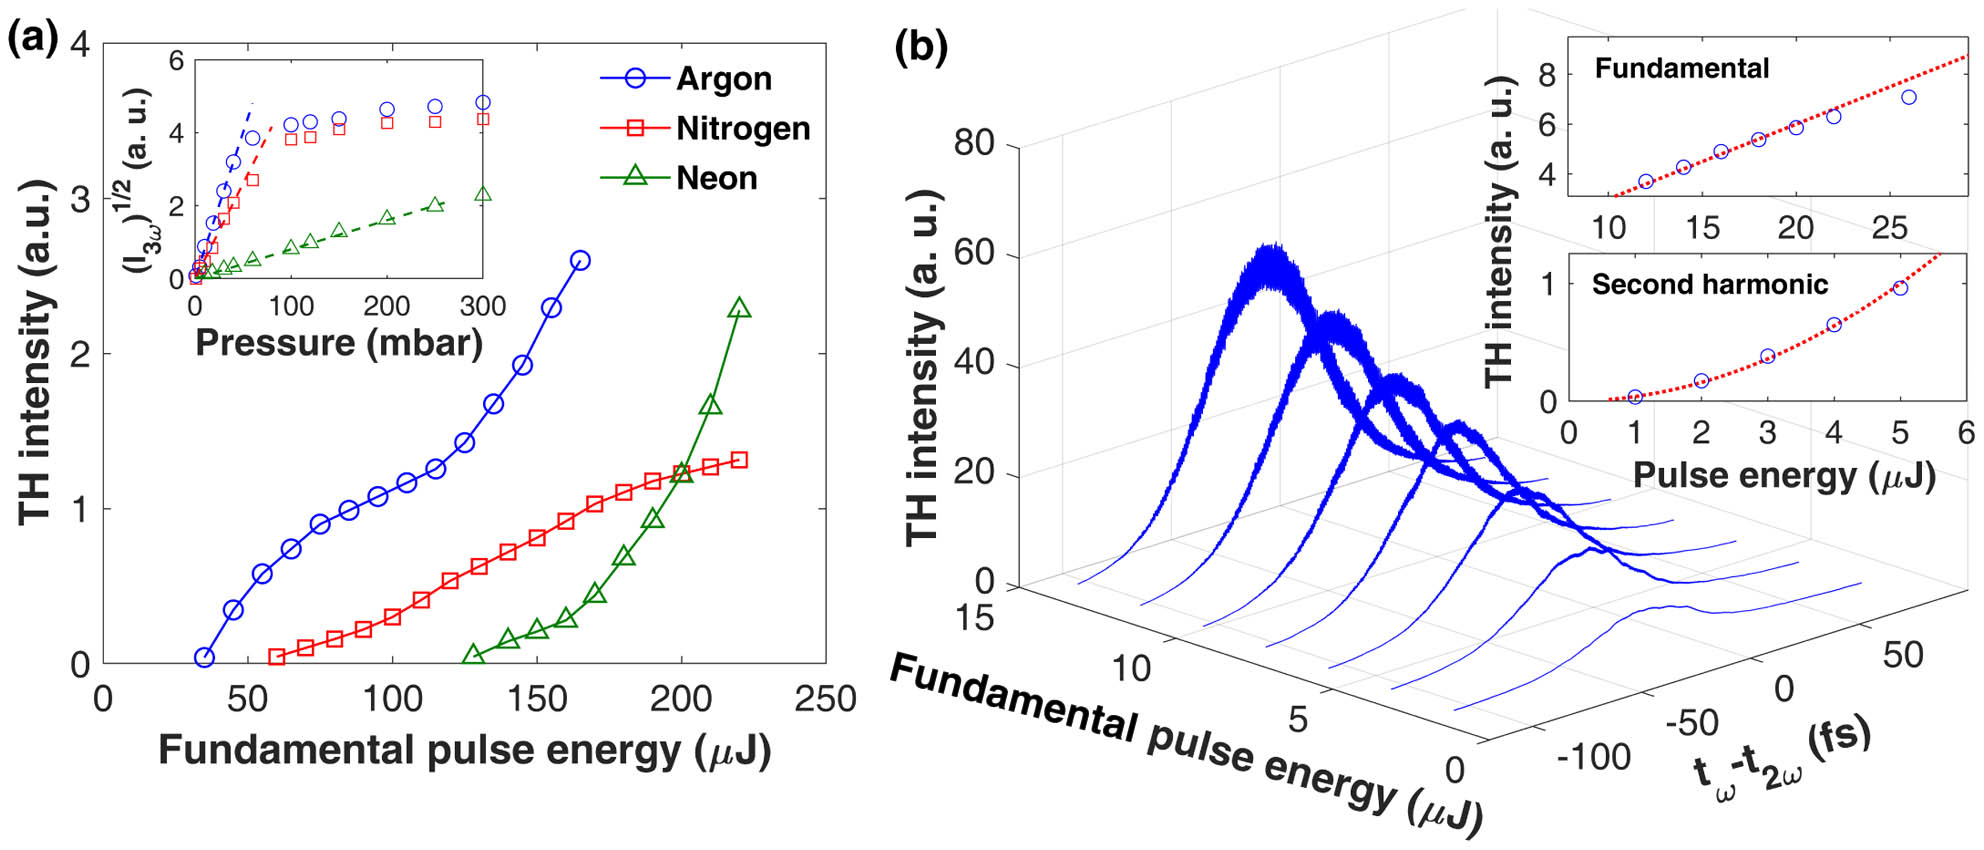 (a) Measured TH intensity versus the fundamental pulse energy at a pressure of 1000 mbar in argon, nitrogen, and neon. According to the measured beam waist radius, the pulse energy of 100 µJ corresponds to the peak intensity of about 5 × 1013 W/cm2. The insert shows the square root of the TH intensity versus the gas pressure at a fundamental pulse energy of 400 µJ in argon, nitrogen, and neon. (b) TH intensity as a function of the pulse time delay and fundamental pulse energy at an SH pulse energy of 1 µJ. The insert shows the TH intensity versus the fundamental pulse energy at an SH pulse energy of 1 µJ and the SH pulse energy at a fundamental pulse energy of 1 µJ, respectively.